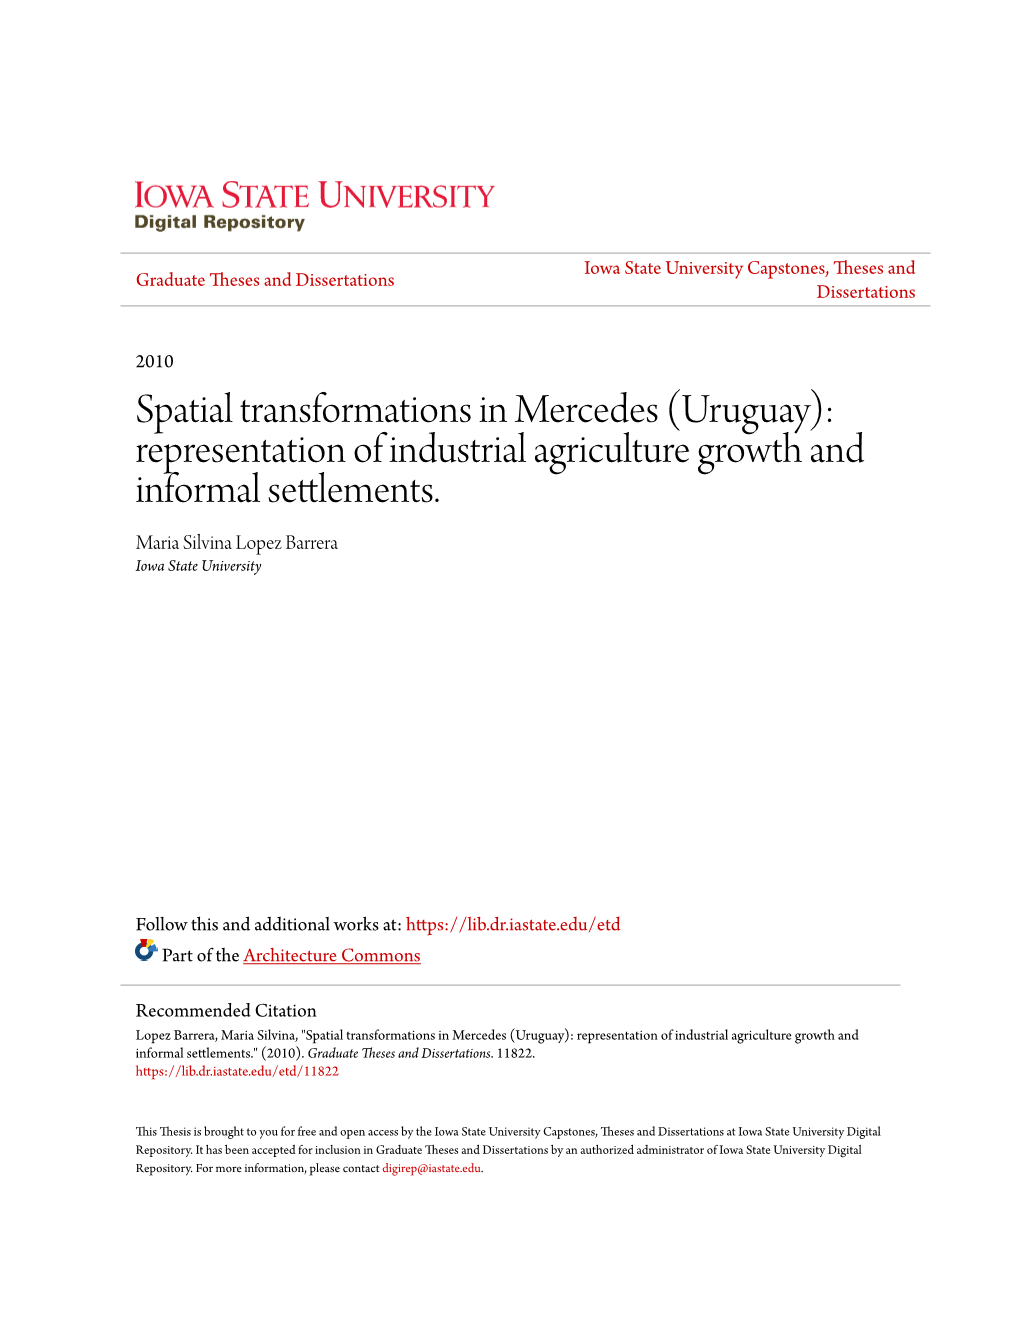 Uruguay): Representation of Industrial Agriculture Growth and Informal Settlements